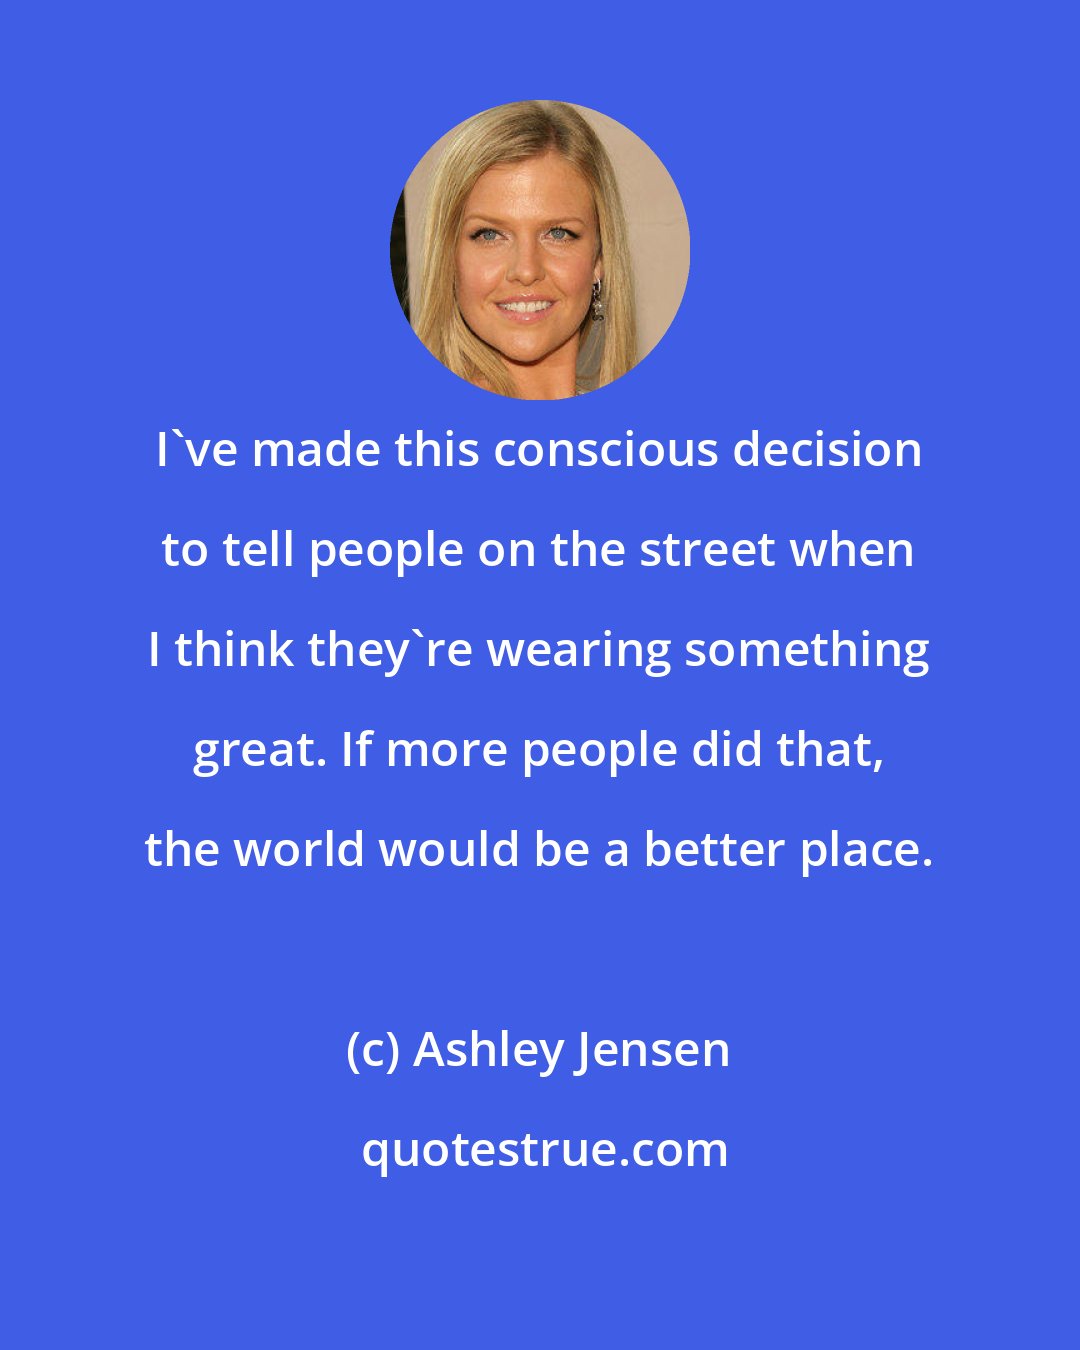 Ashley Jensen: I've made this conscious decision to tell people on the street when I think they're wearing something great. If more people did that, the world would be a better place.